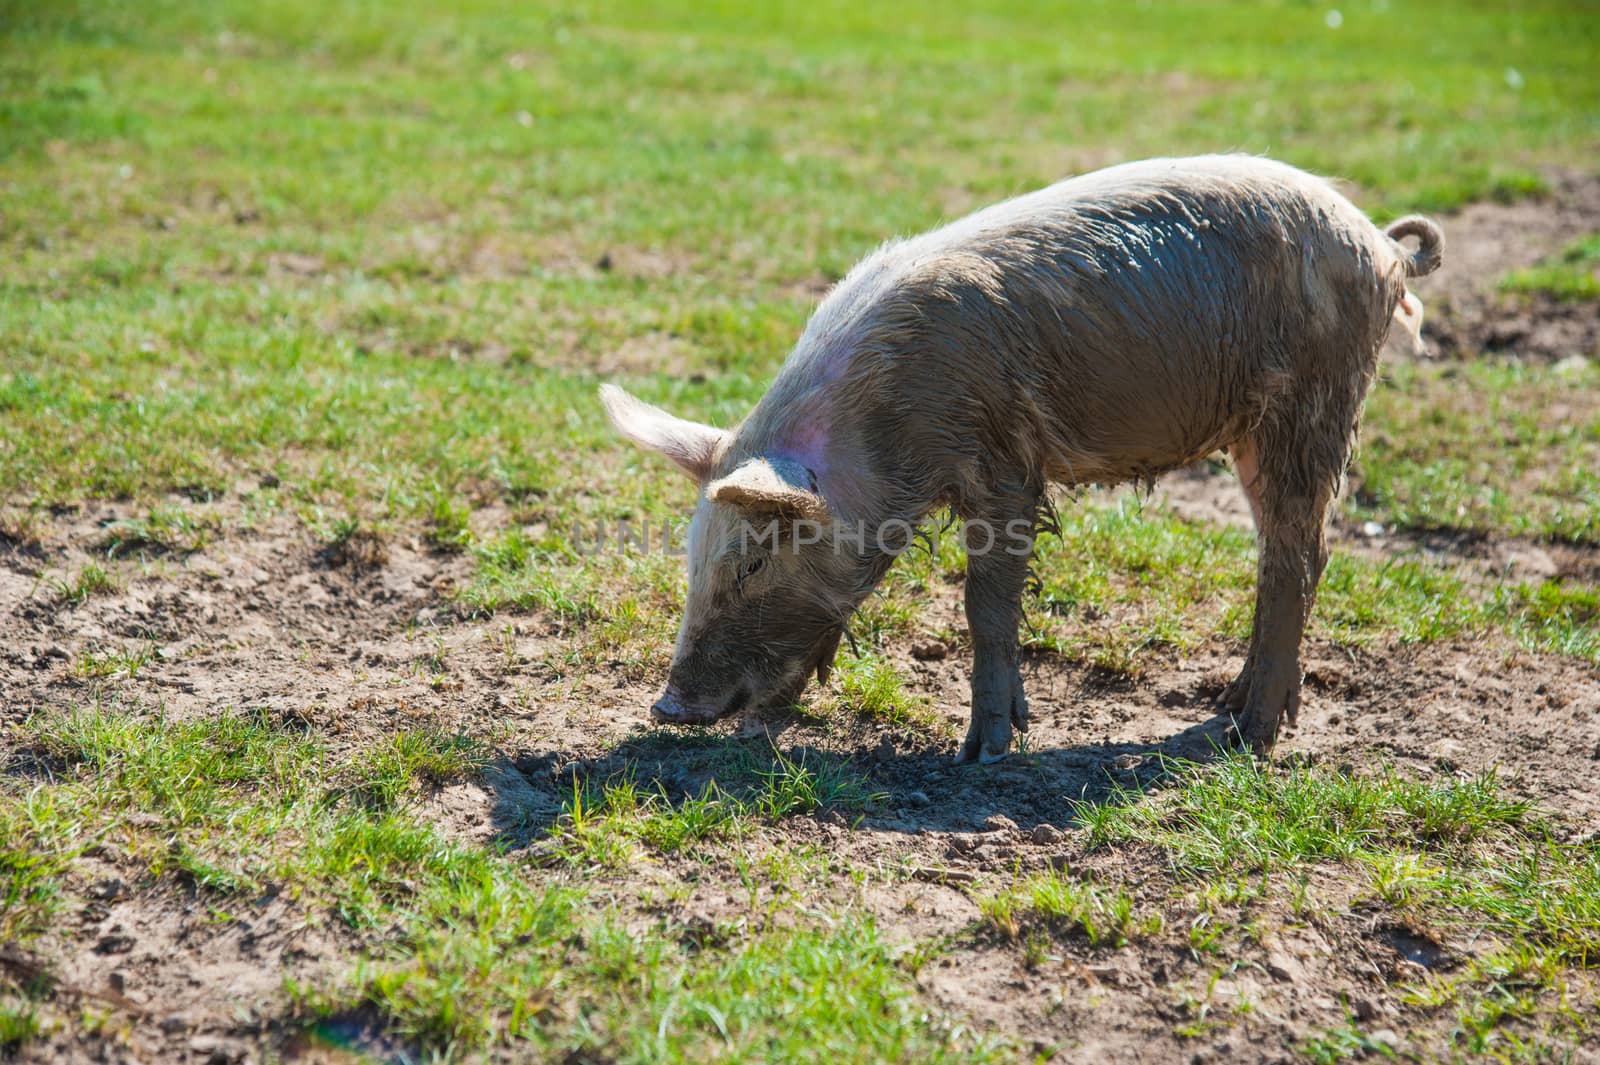 Pig farm. Pigs in field. Pig running on a green meadow